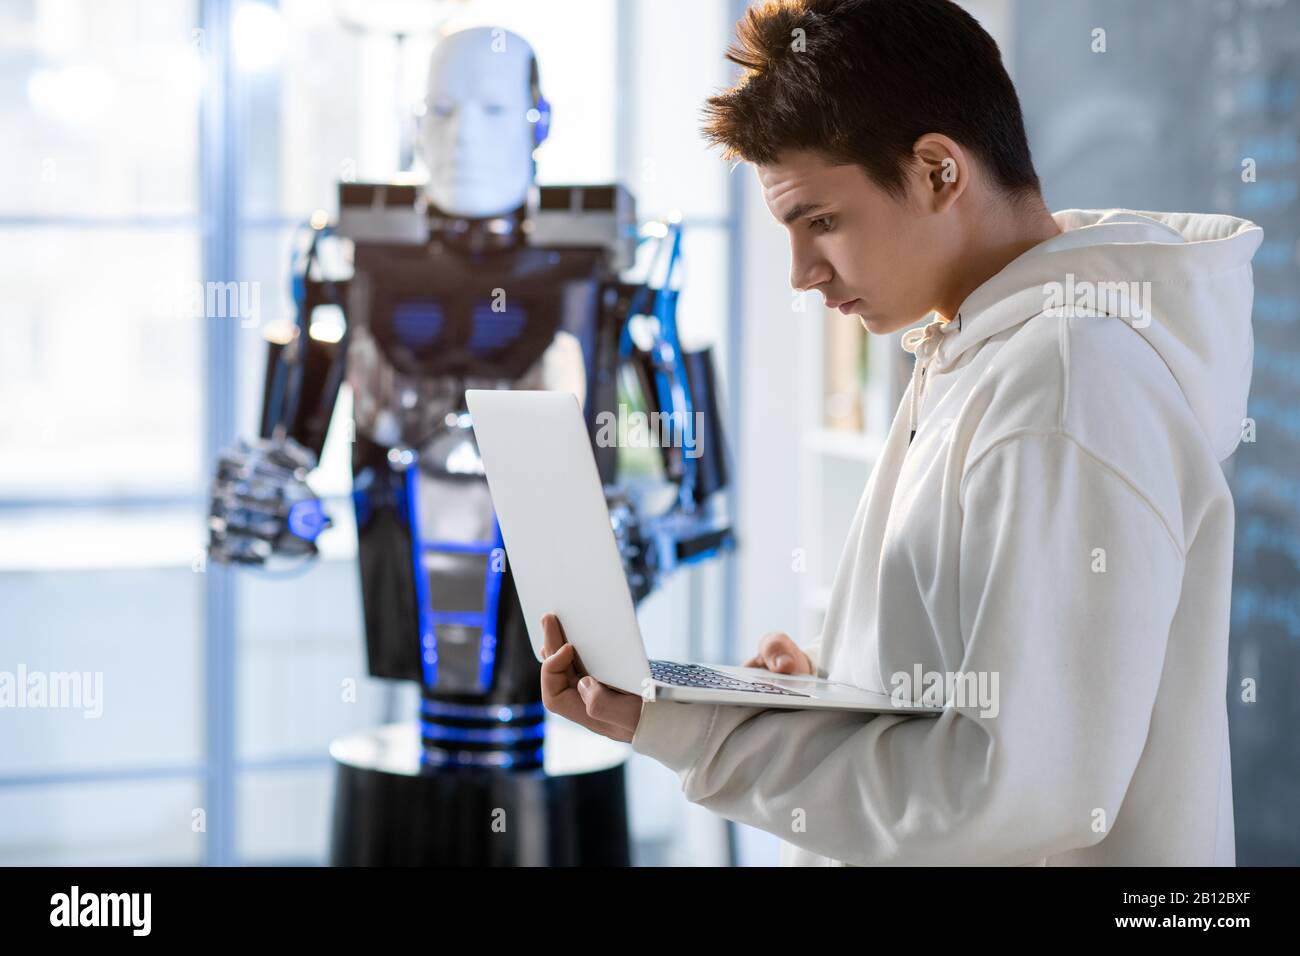 Young student looking at laptop display while working with automation robot Stock Photo